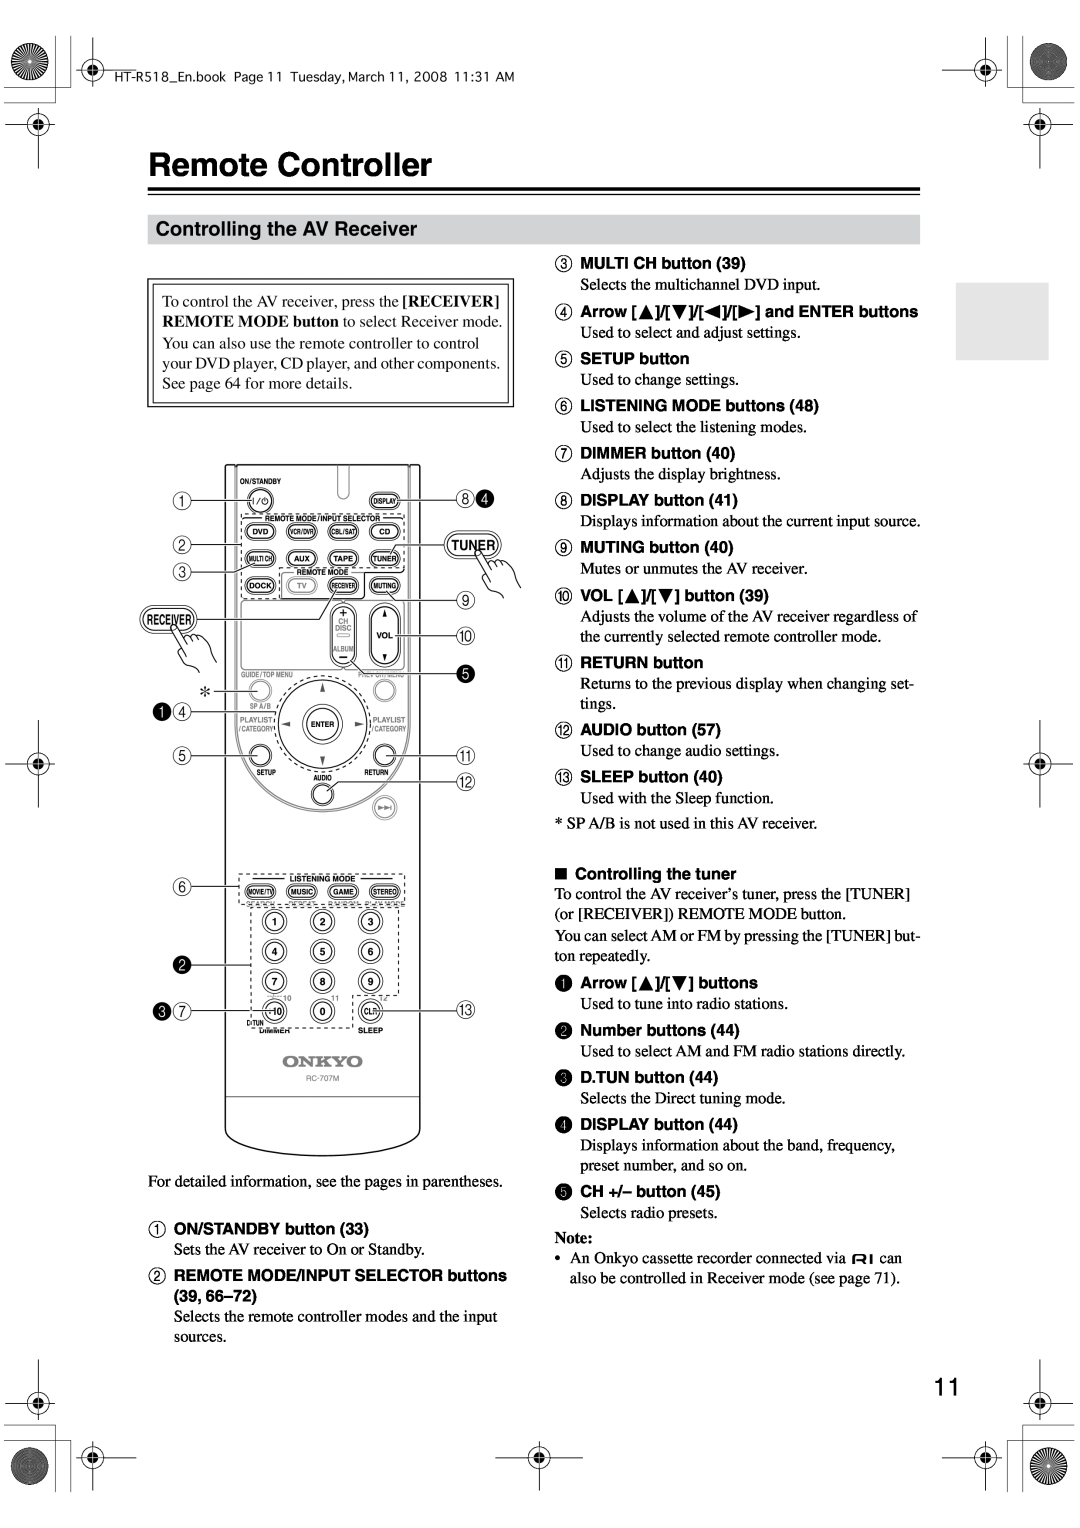 Onkyo HT-R518 instruction manual Remote Controller, Controlling the AV Receiver 